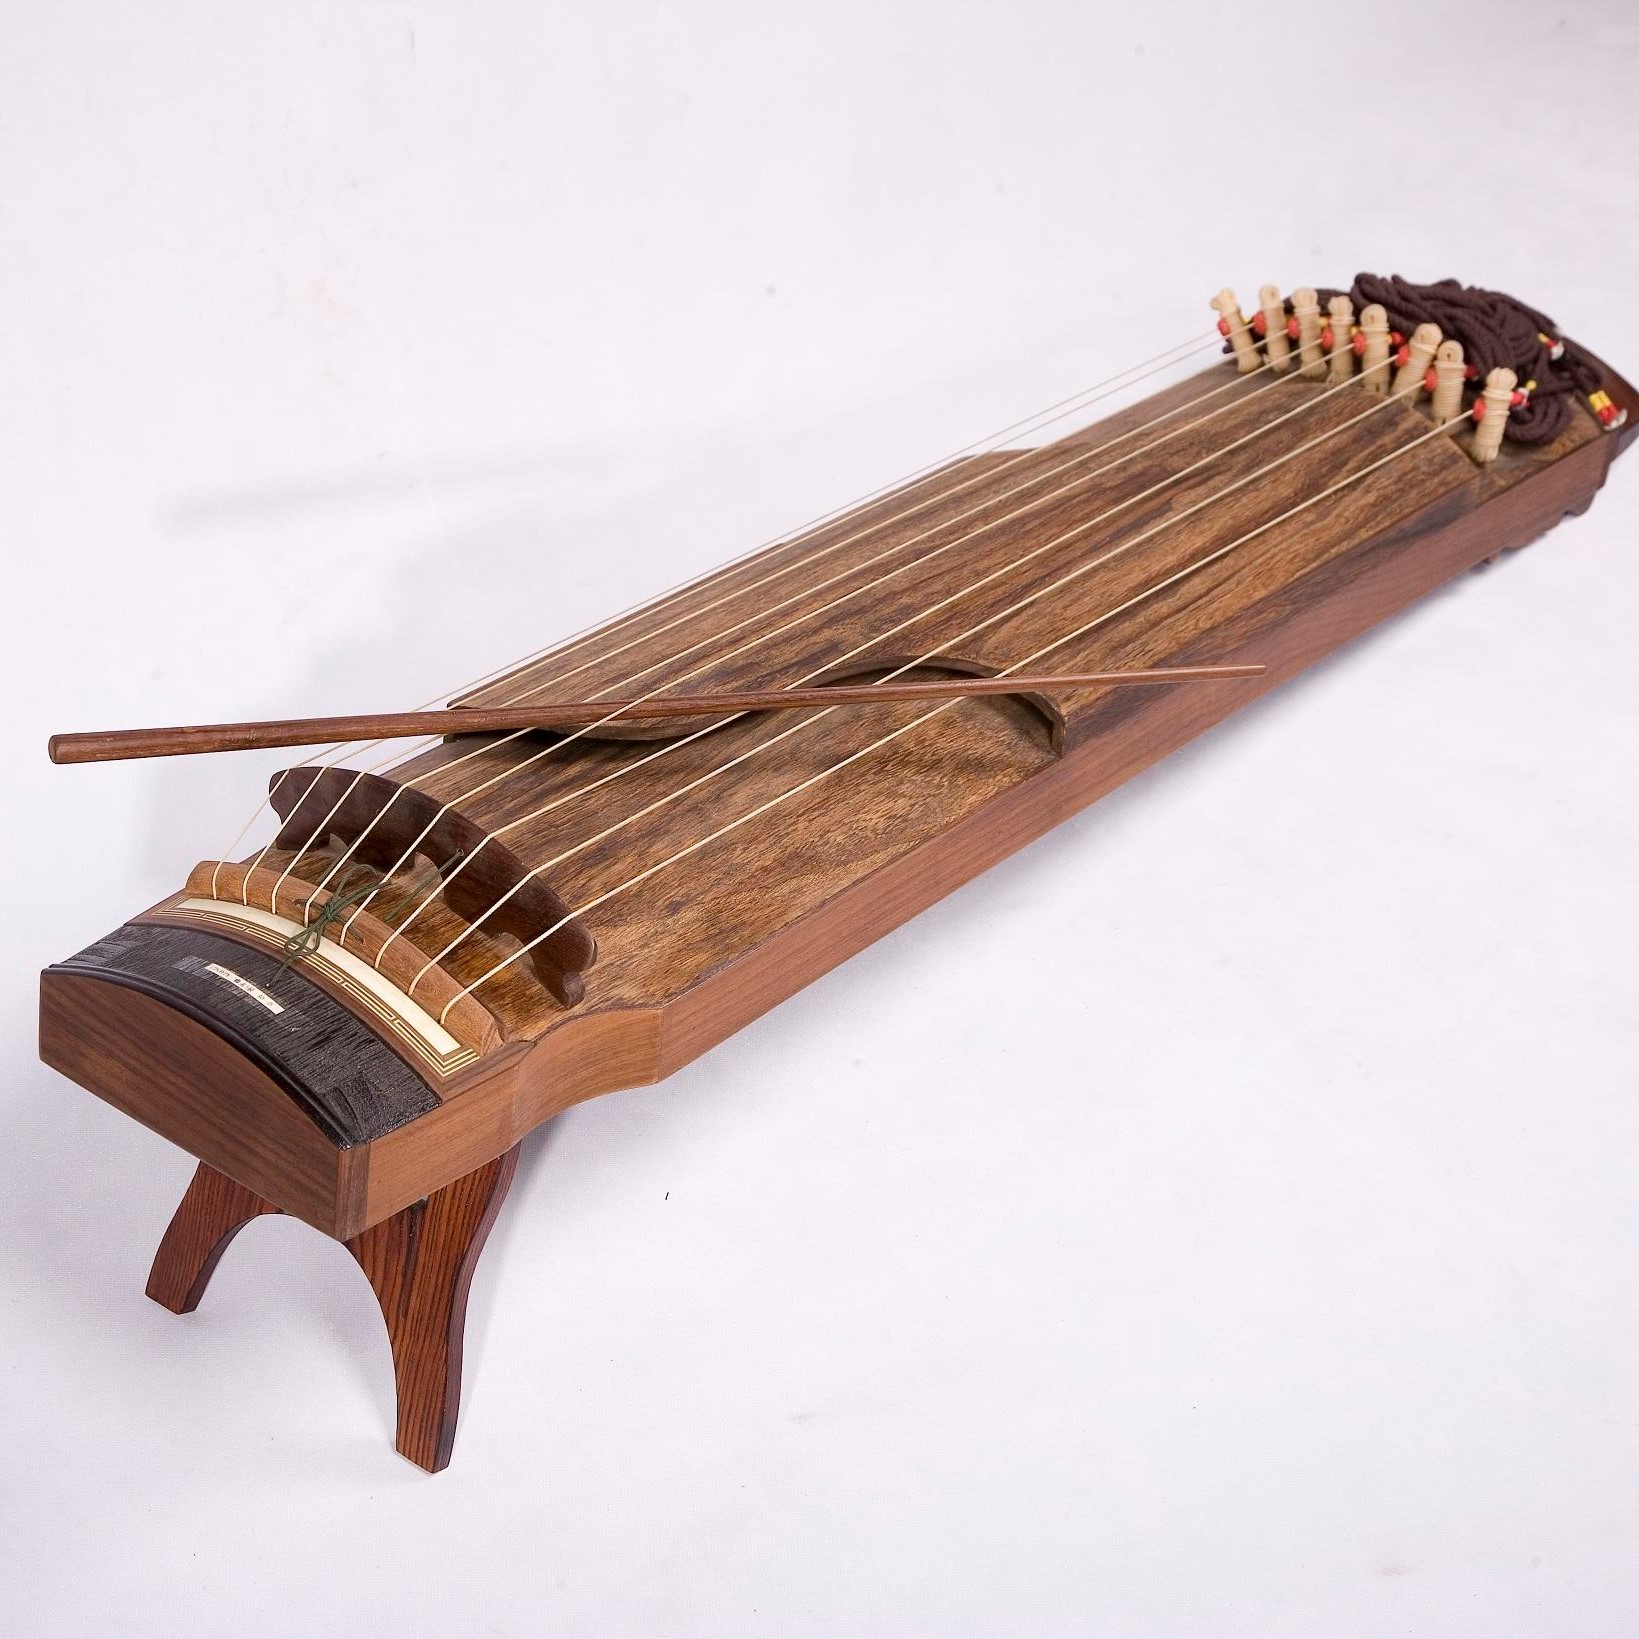 The structure of the zither